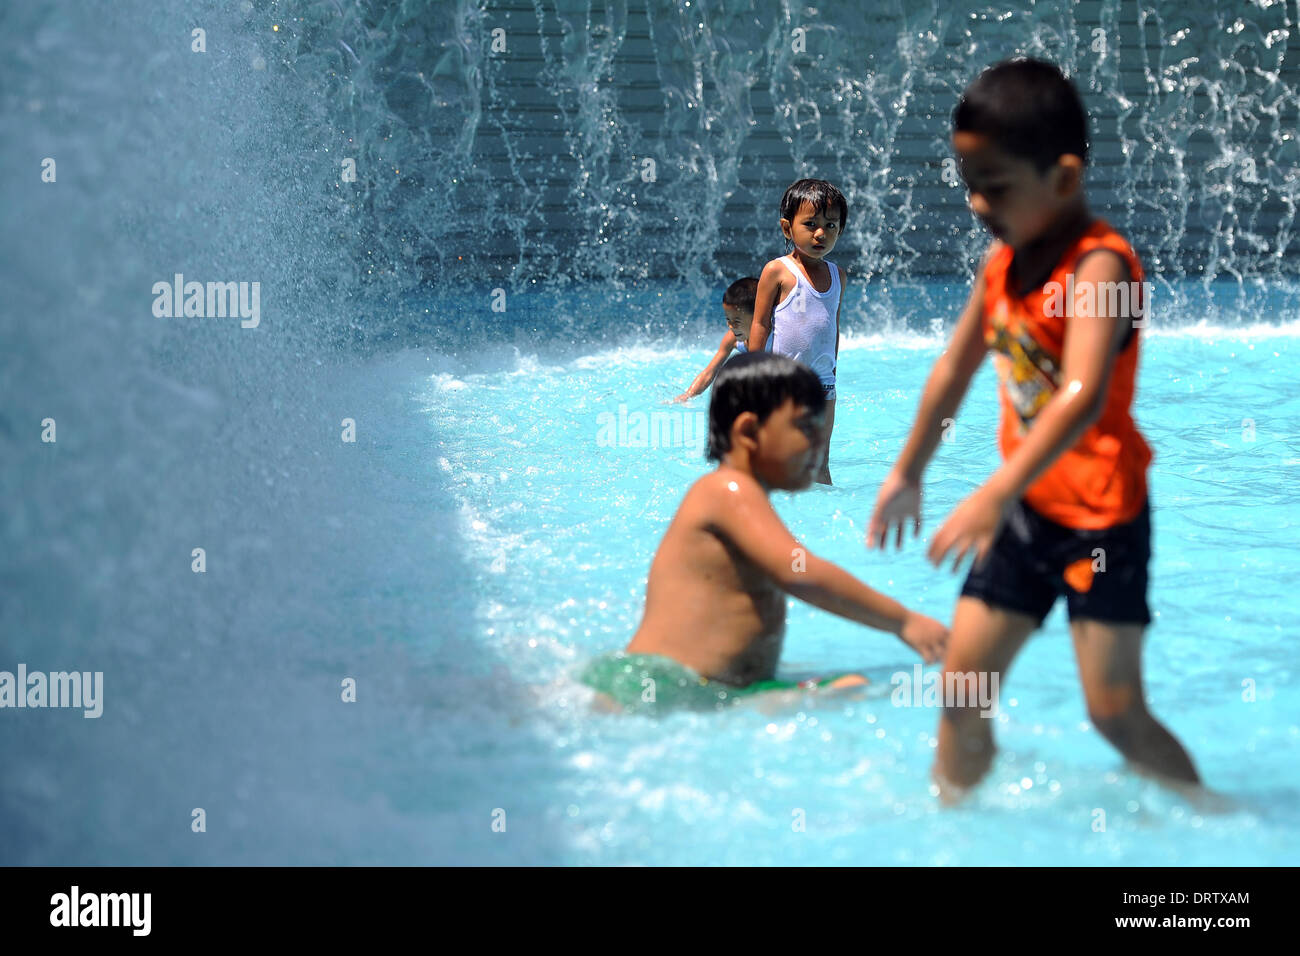 Kuala Lumpur, Malaysia. 1st Feb, 2014. A child looks on while playing in a water park on the second day of Chinese Lunar New Year Kuala Lumpur, Malaysia, Saturday, February 1, 2014. In Malaysia, during religious festivities there is usually two days public holiday, which other ethnic races will enjoy the holidays. © Joshua Paul/NurPhoto/ZUMAPRESS.com/Alamy Live News Stock Photo